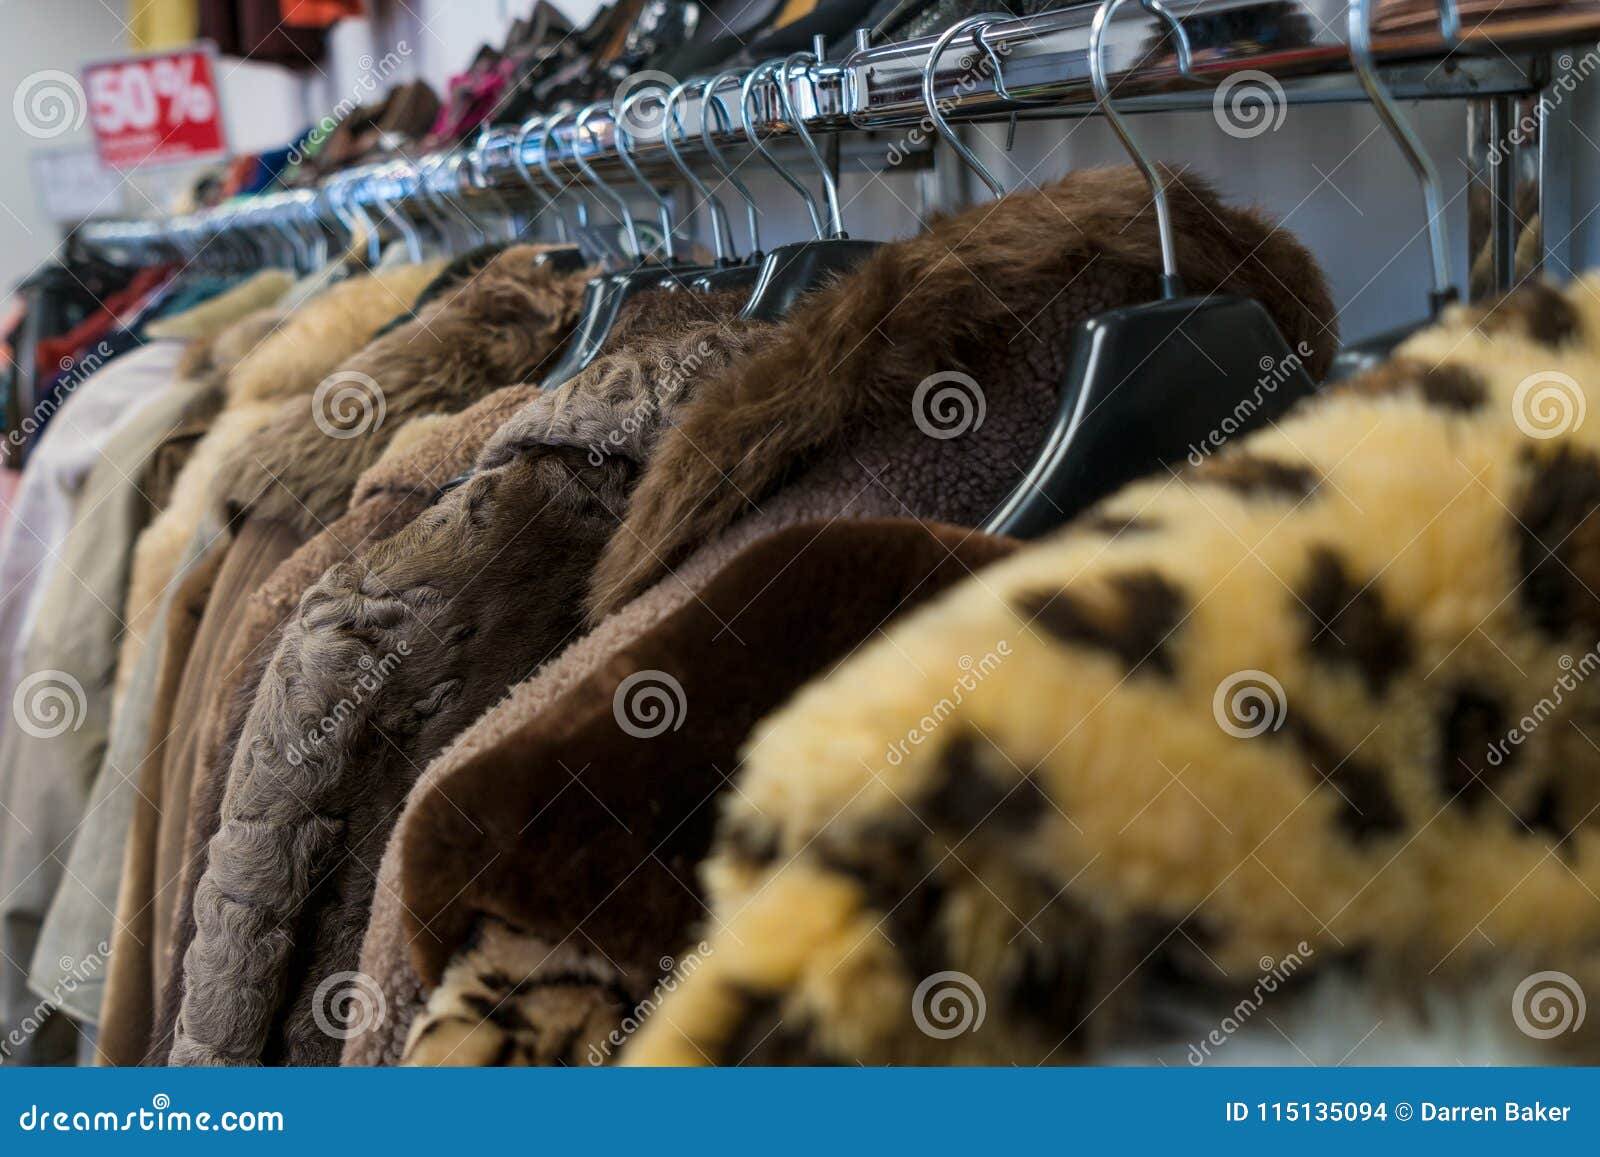 rail of secondhand fur coats for sale in a thrift store shop